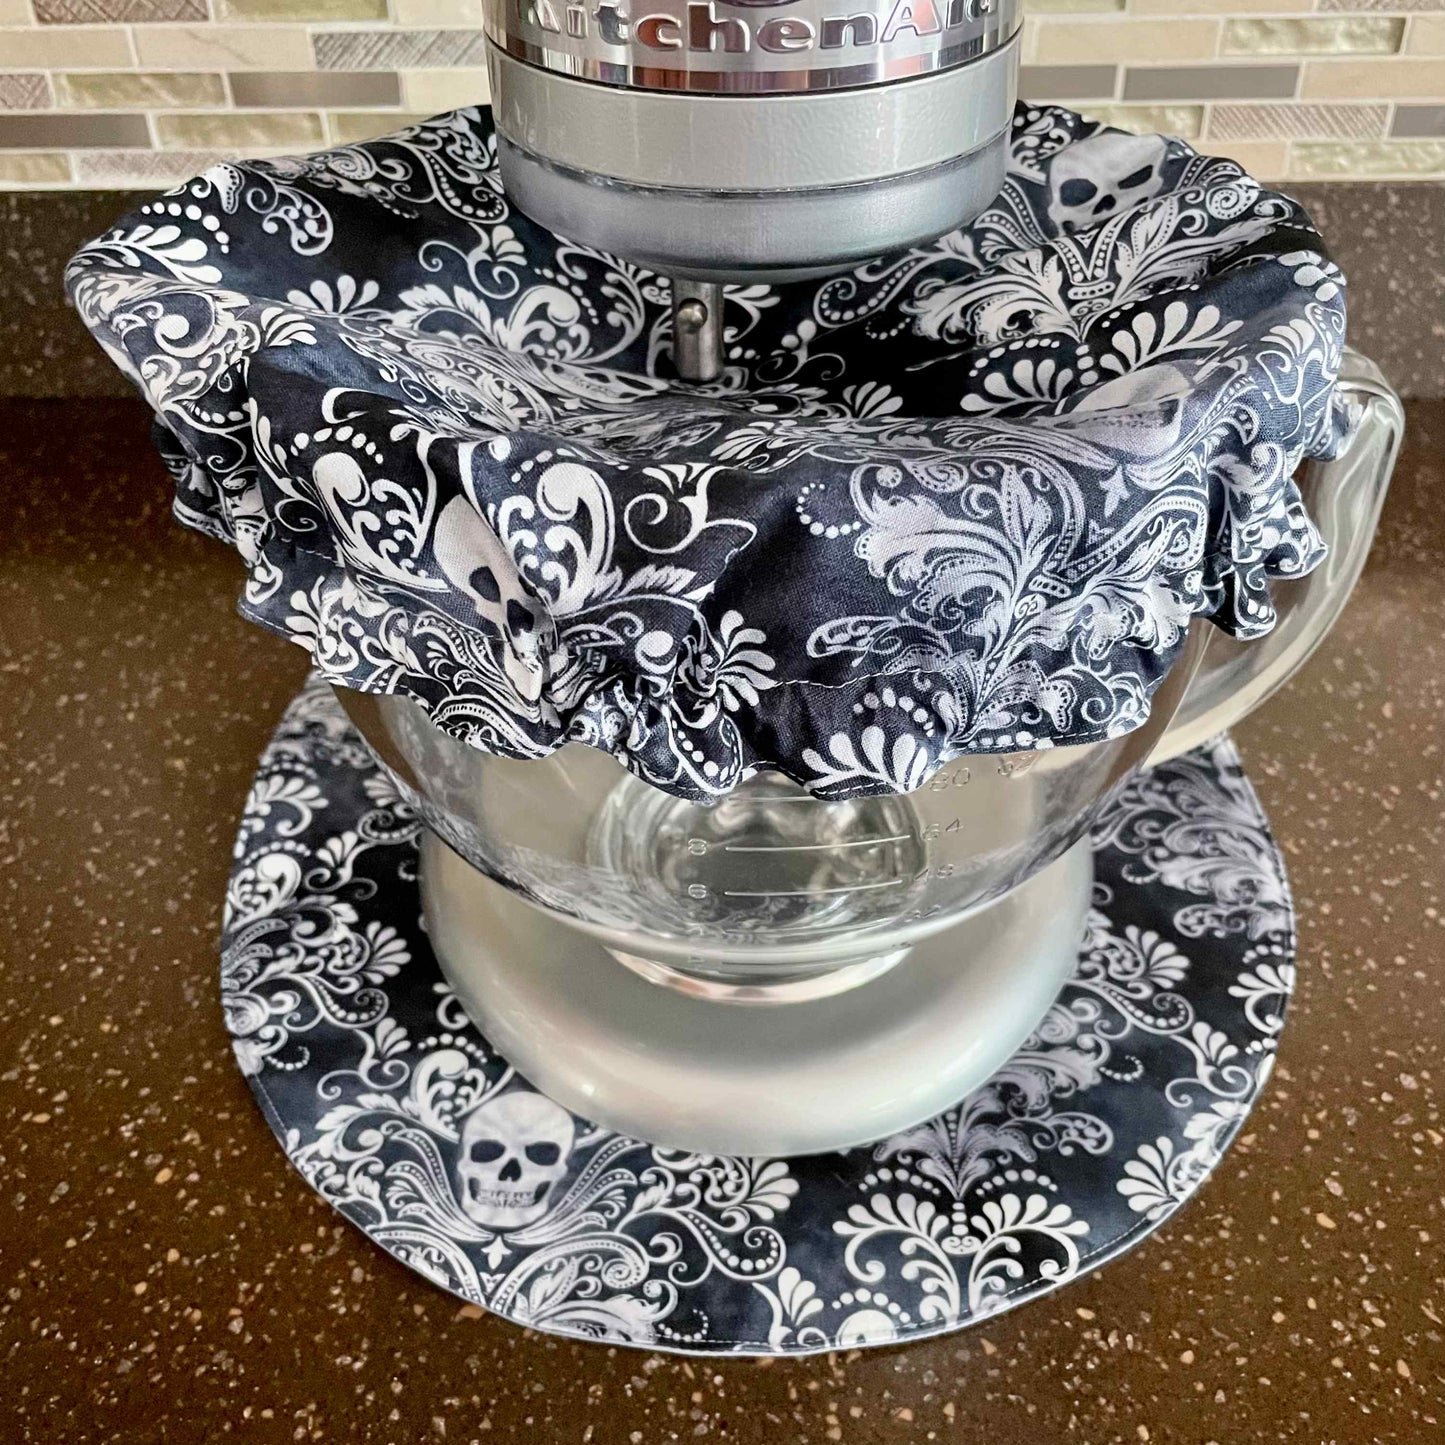 Stand Mixer Bowl Covers -  Skull Damask